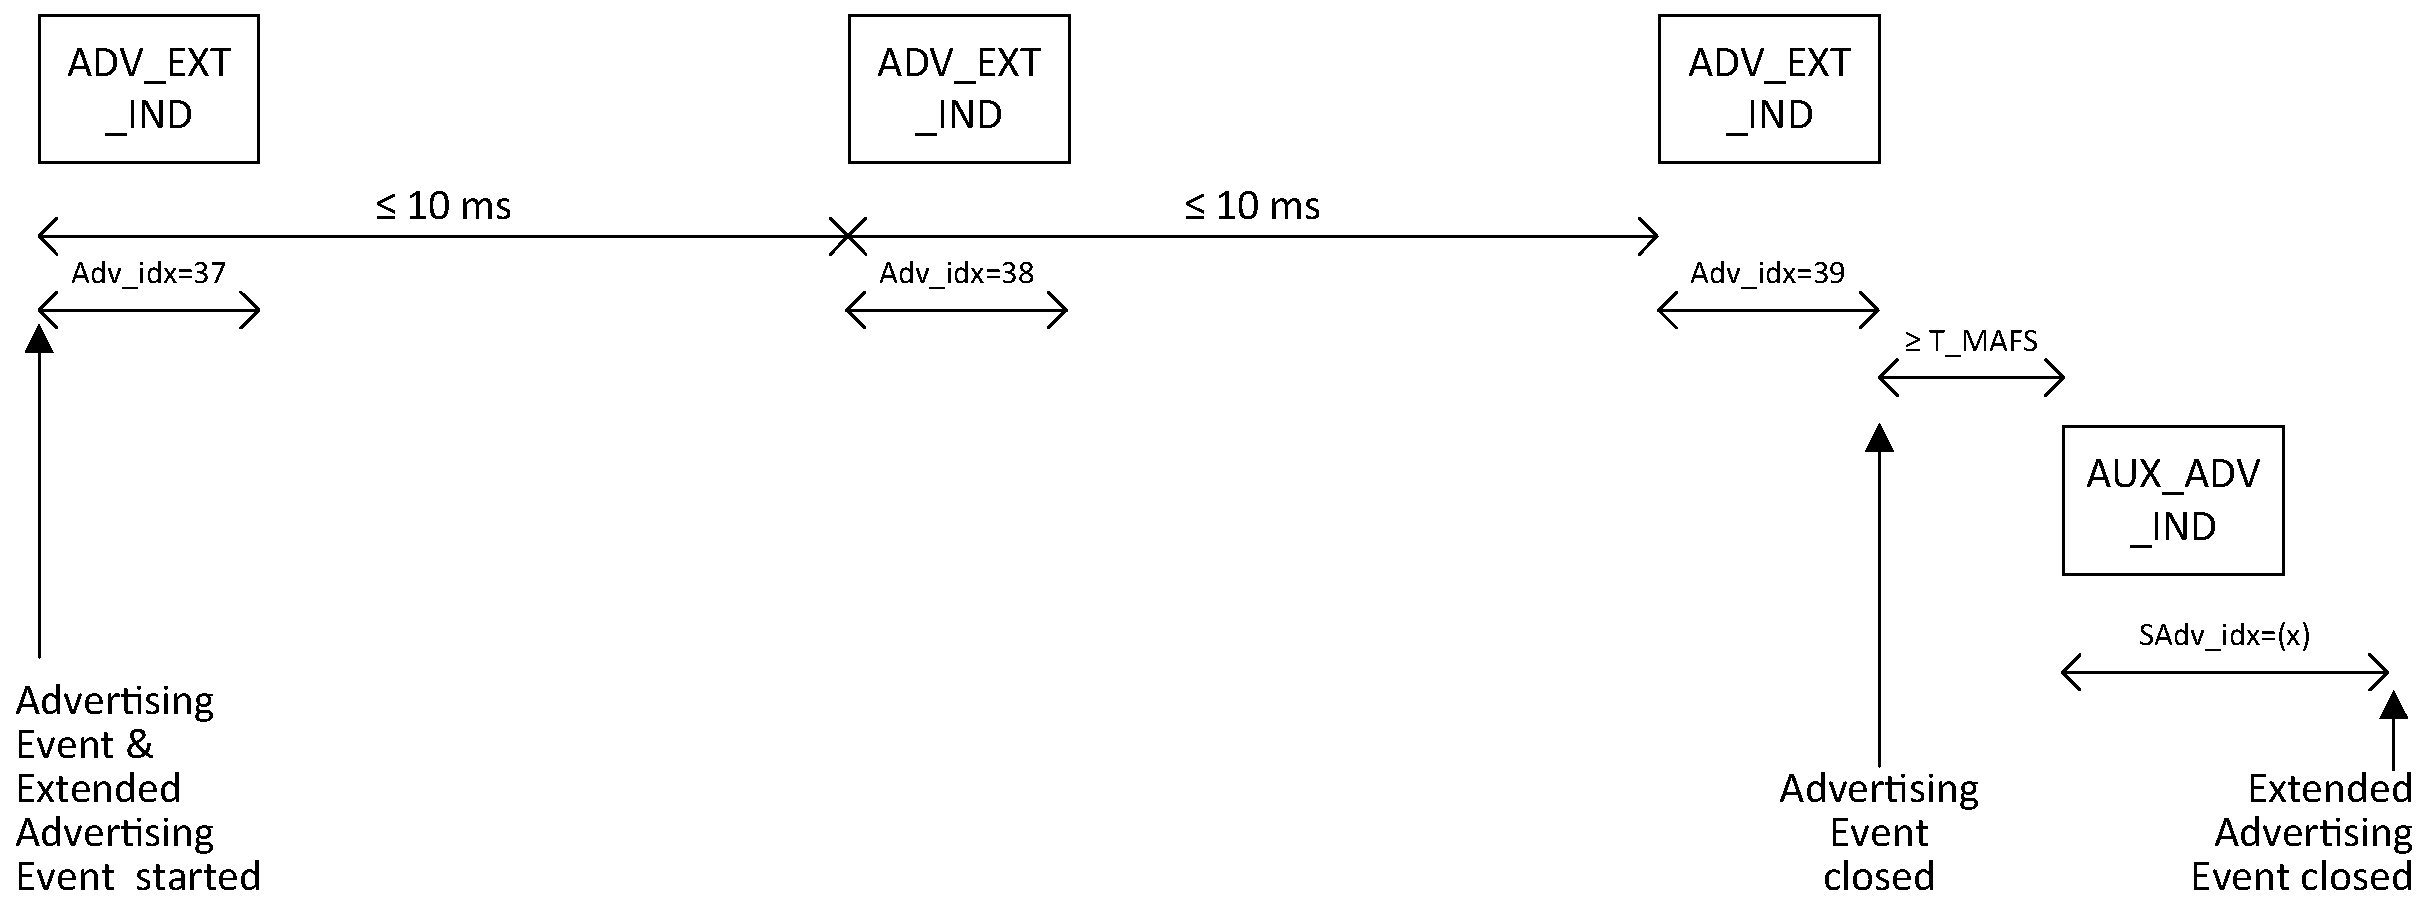 Non-connectable and non-scannable undirected advertising event using the ADV_EXT_IND PDU